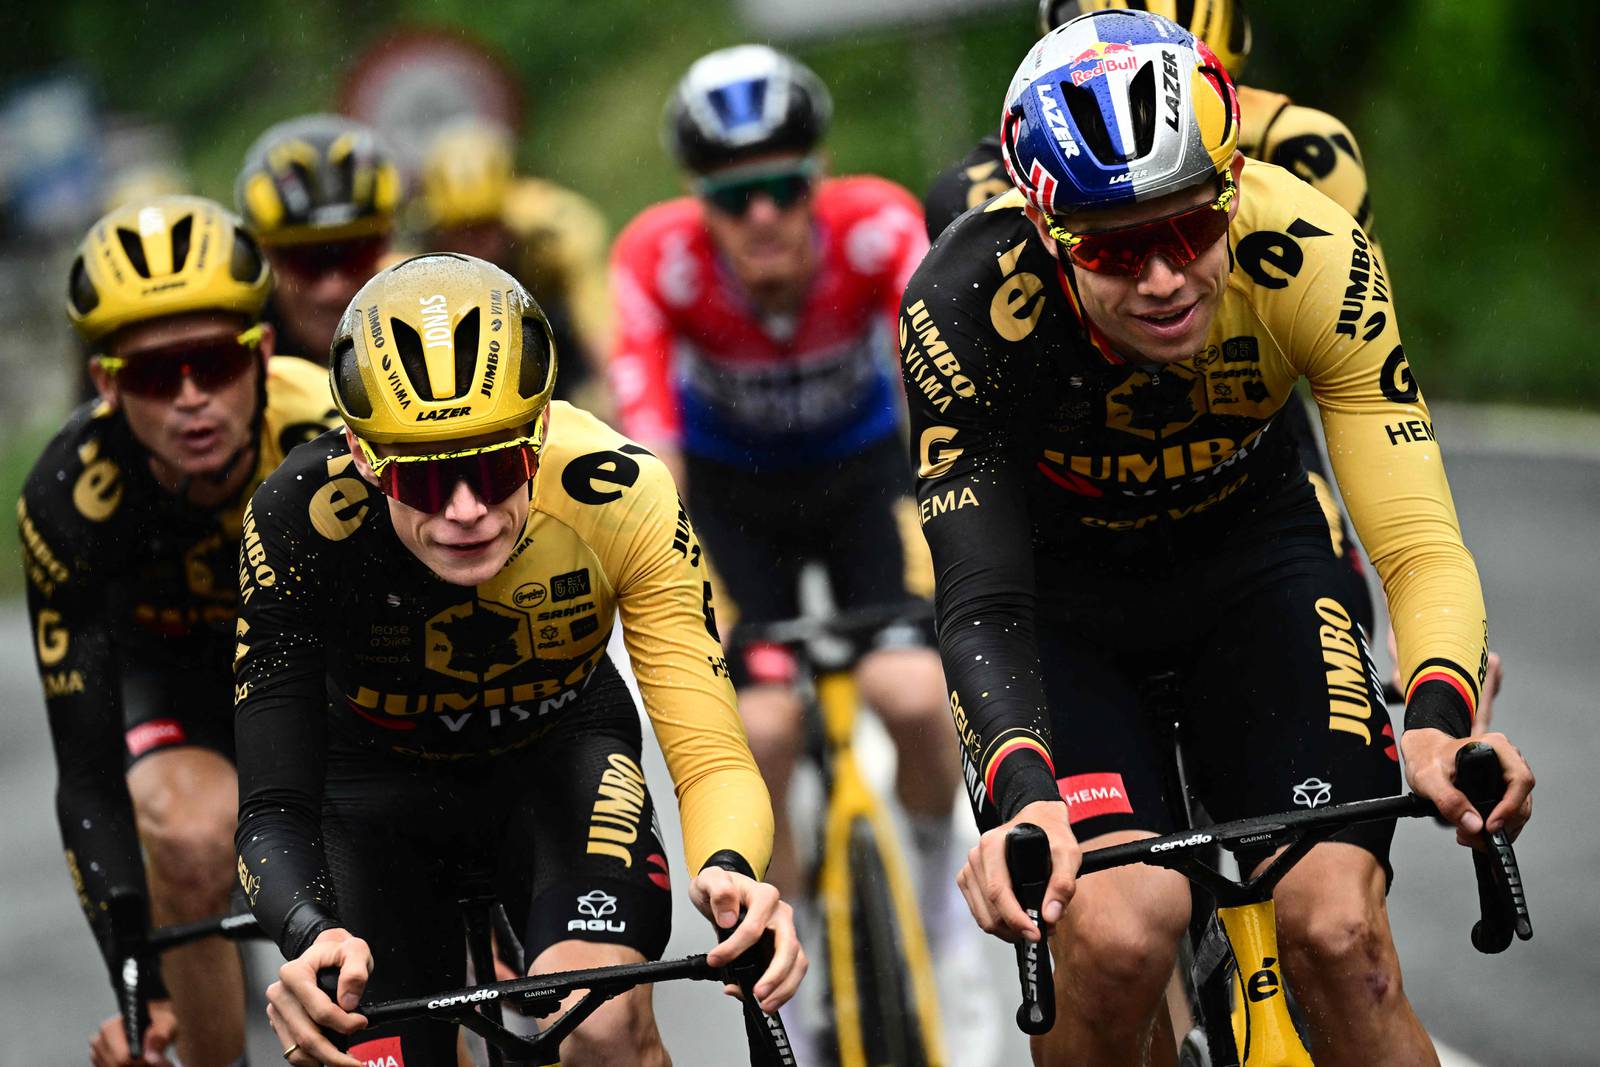 Tour de France 2023 Complete teambyteam guide and route information